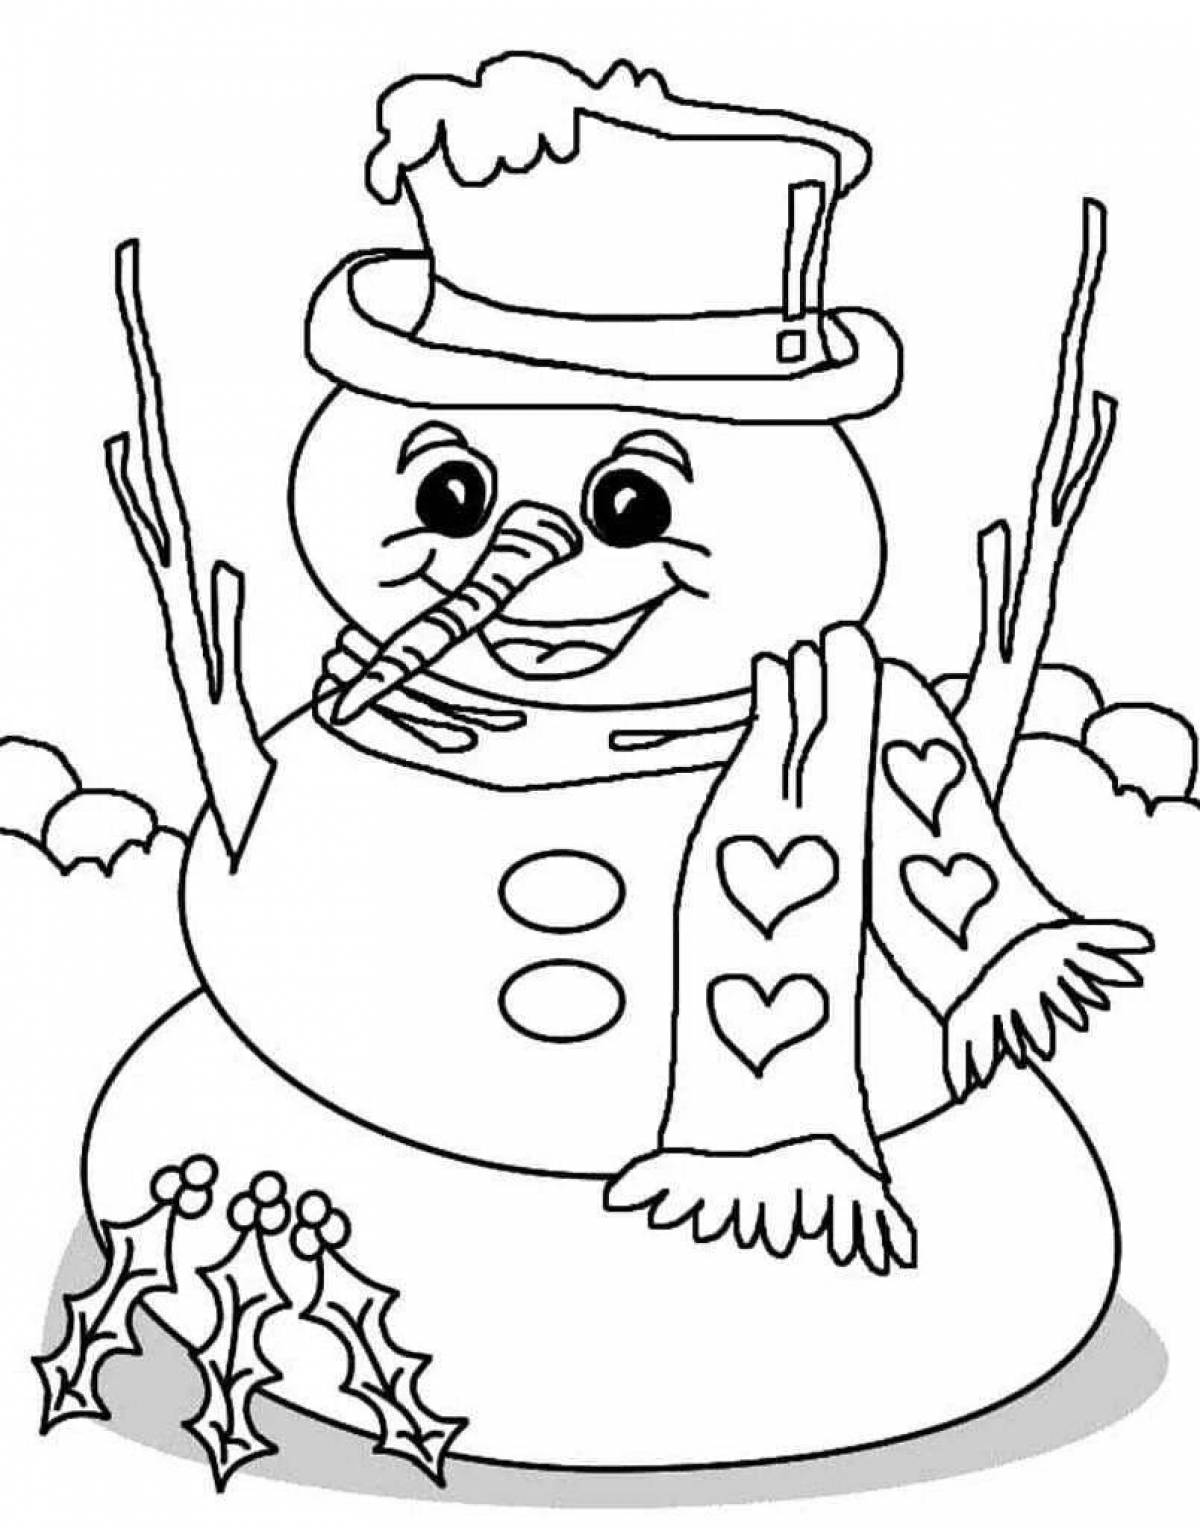 Snowman for children 6 7 years old #2